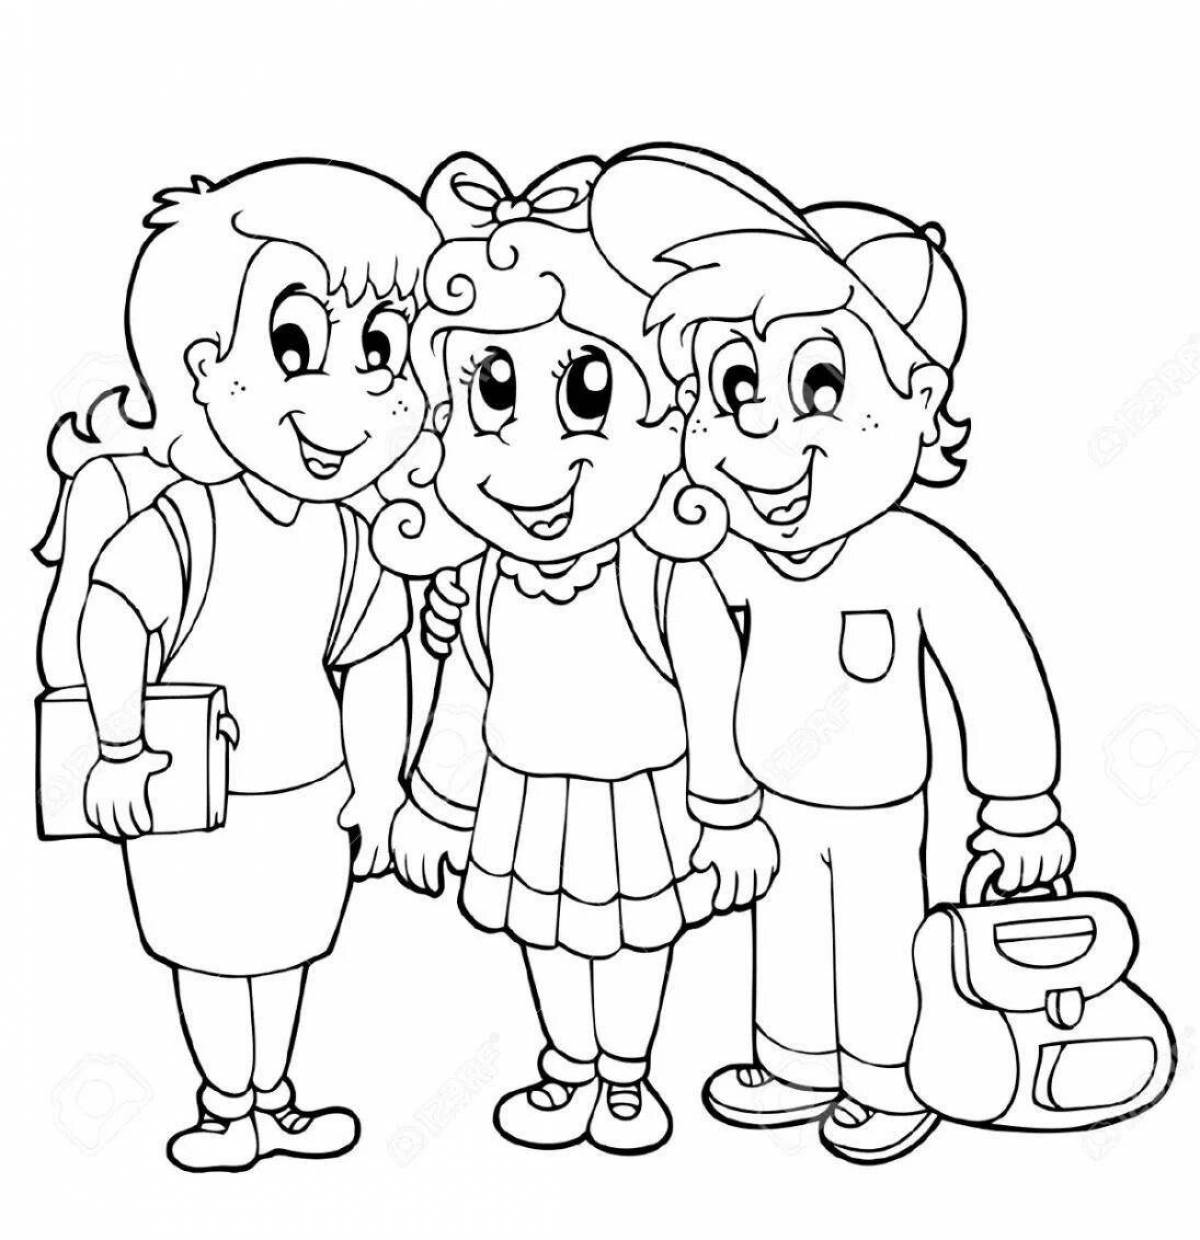 Creative friends coloring pages for kids